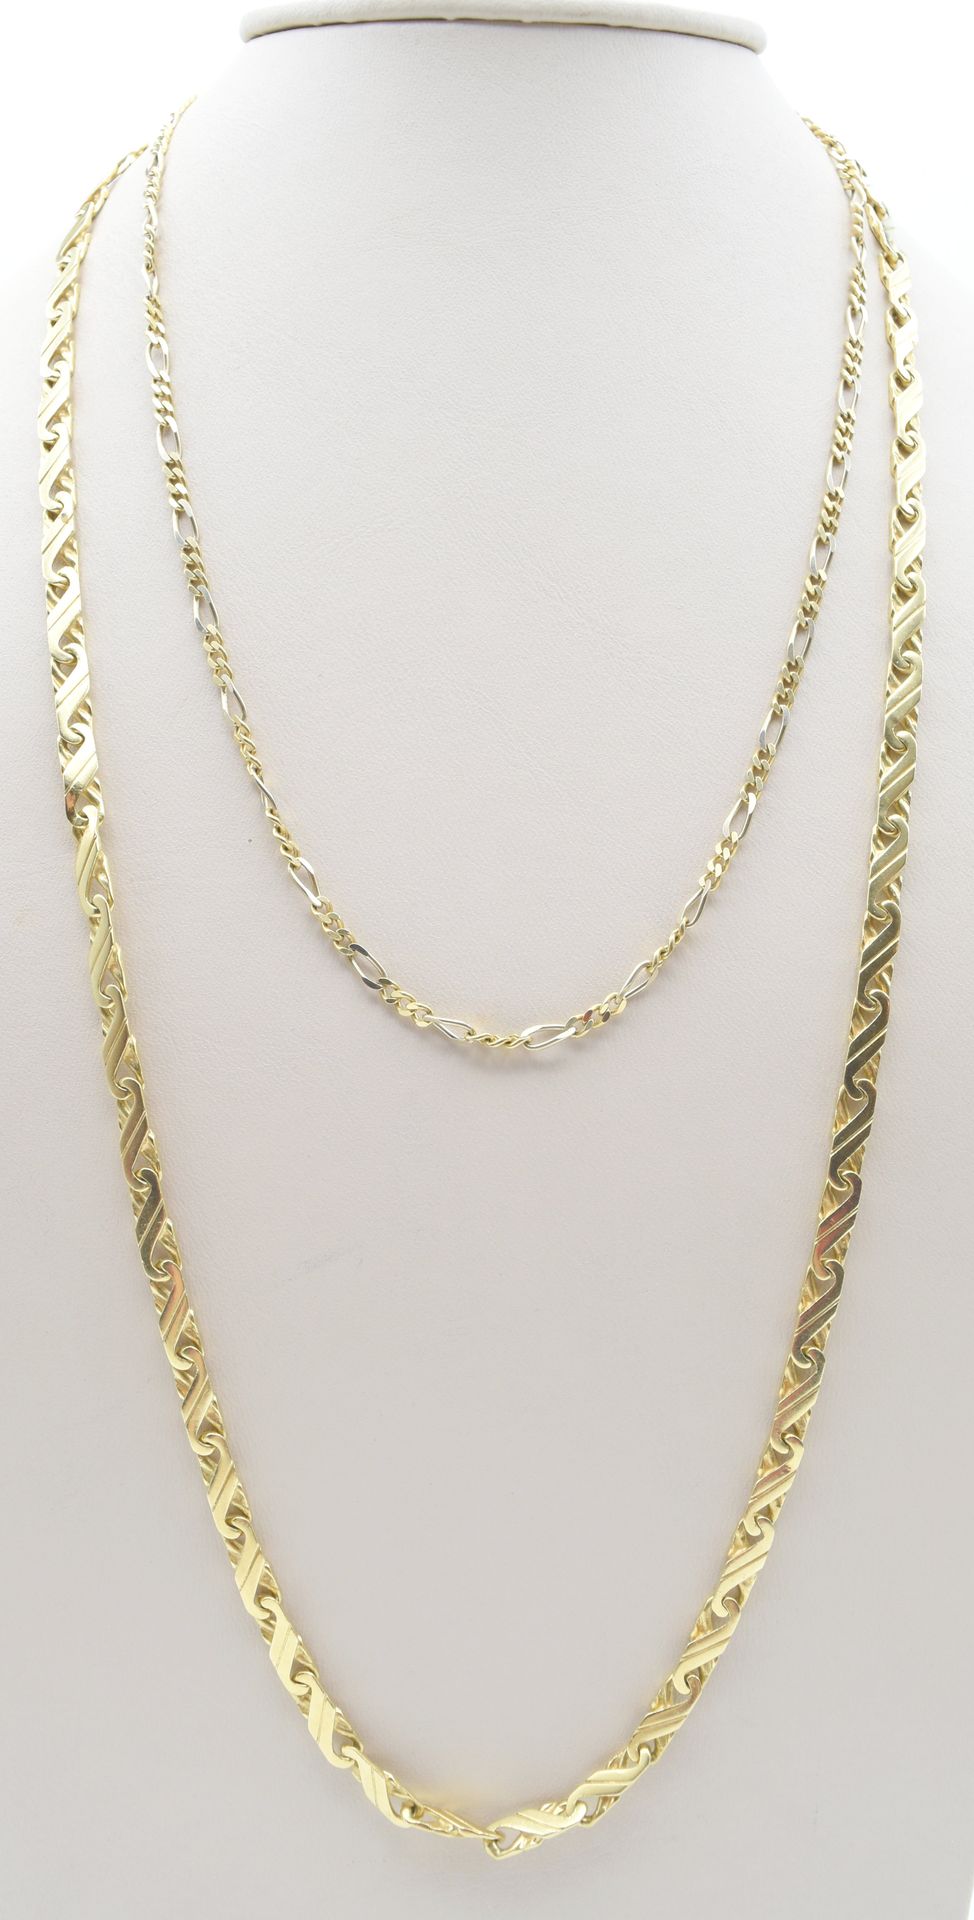 Null 2 necklaces in 18 ct yellow and white gold - 70.6 g (90 & 45 cm) 

Beschrij&hellip;